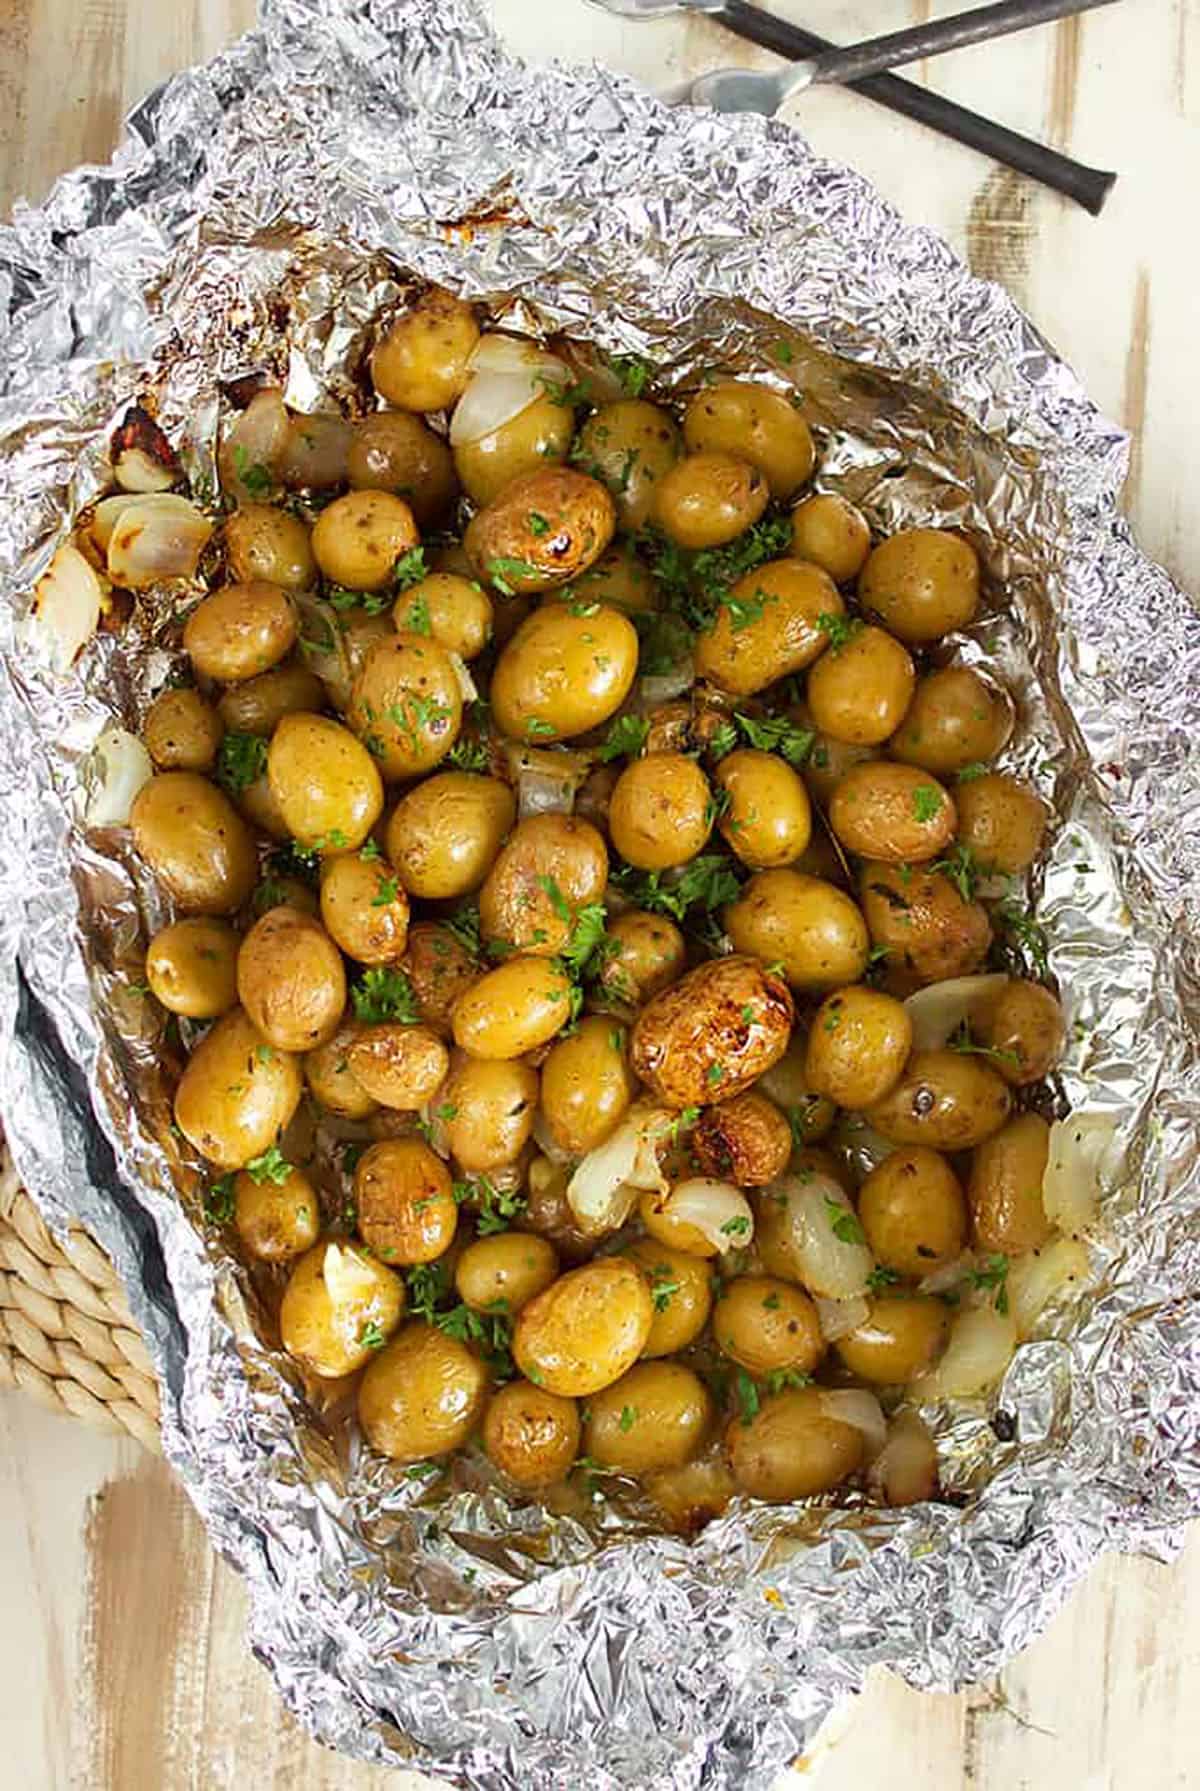 Grilled baby Yukon potatoes in a foil packet with garlic cloves on a wood background.